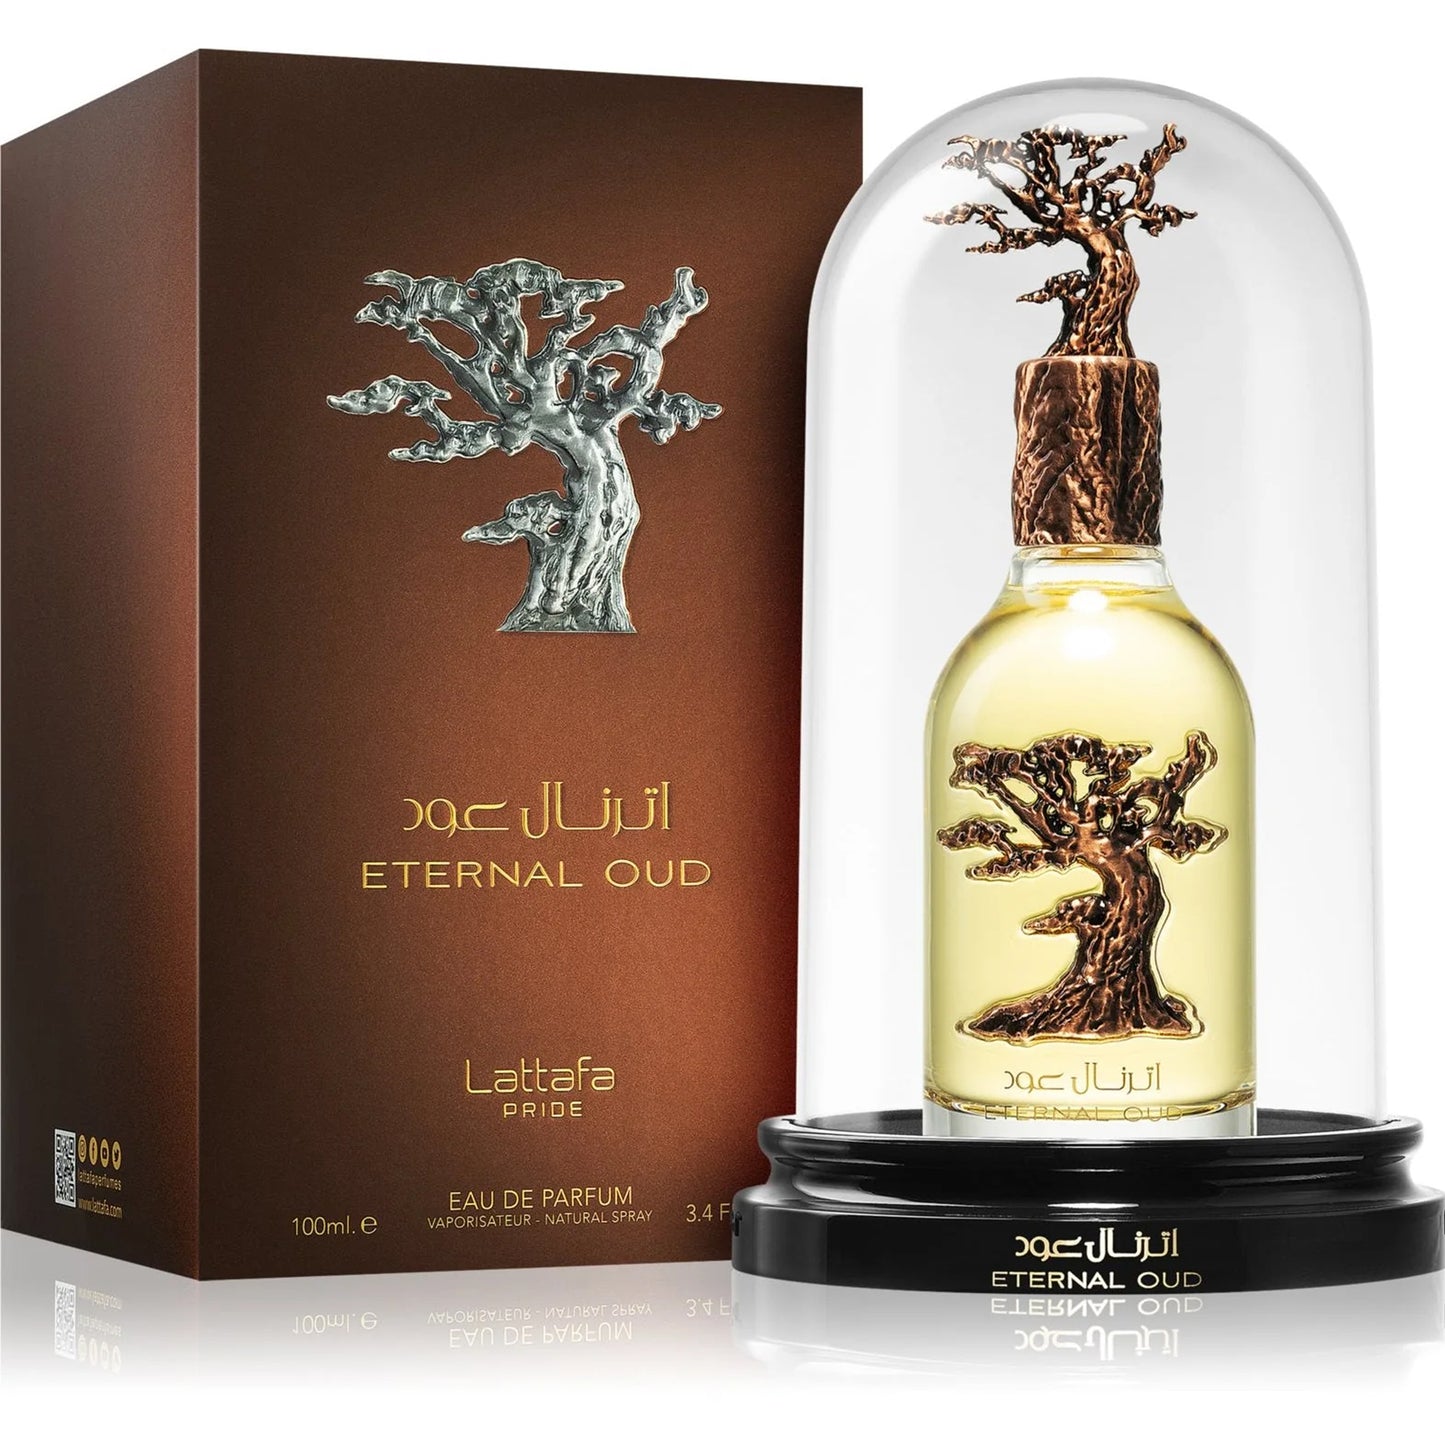 Eternal Oud EDP - 100ml - Lattafa Pride Elite Collection - Balanced scent with Amber, Sweet, Powdery Fruit, and warm Oud